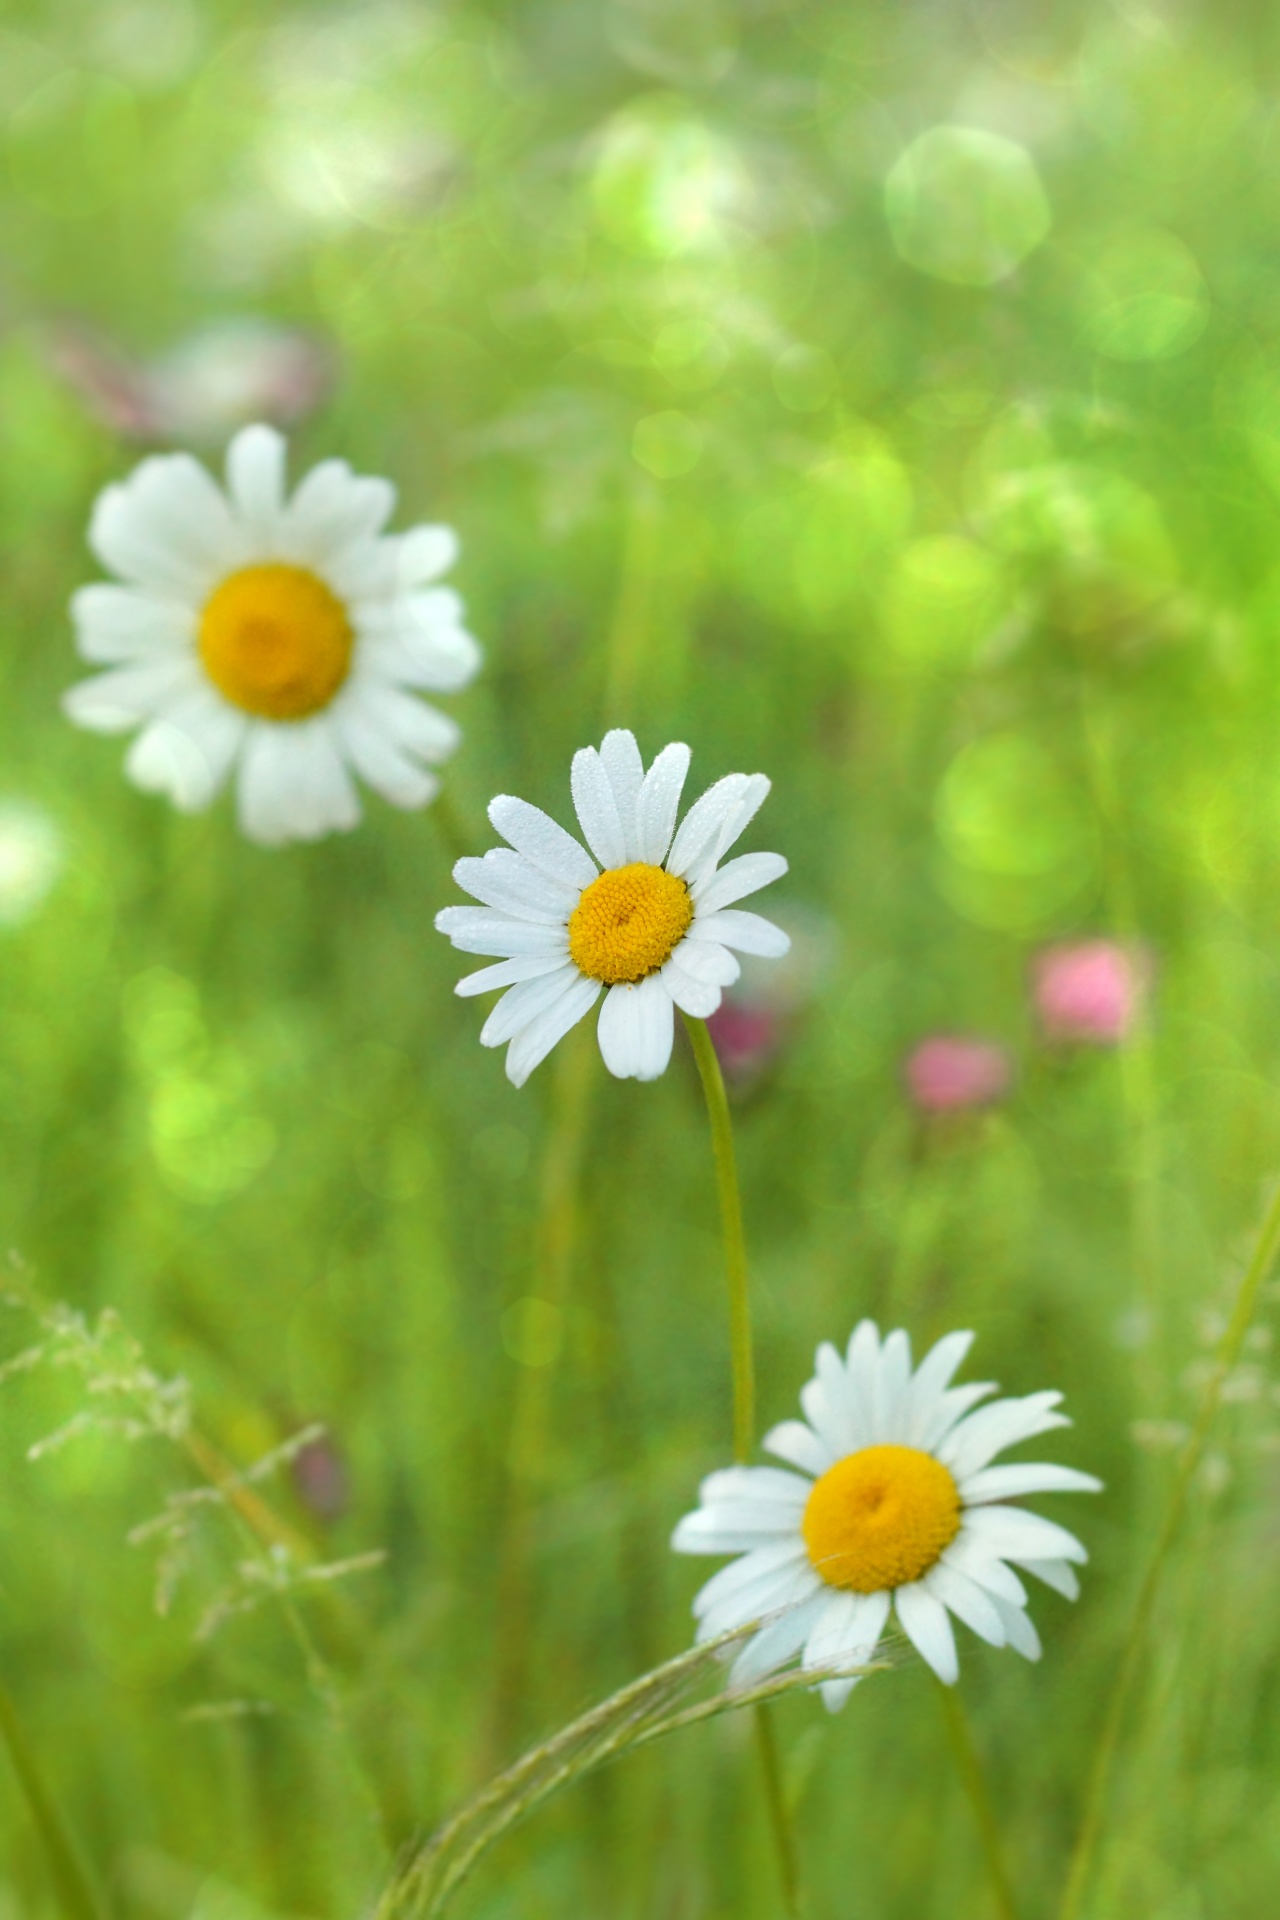 Blossom flower garden nature white daisy chamomile colors fragrant summer bees colorful blooming tender romantic spring perennial plant